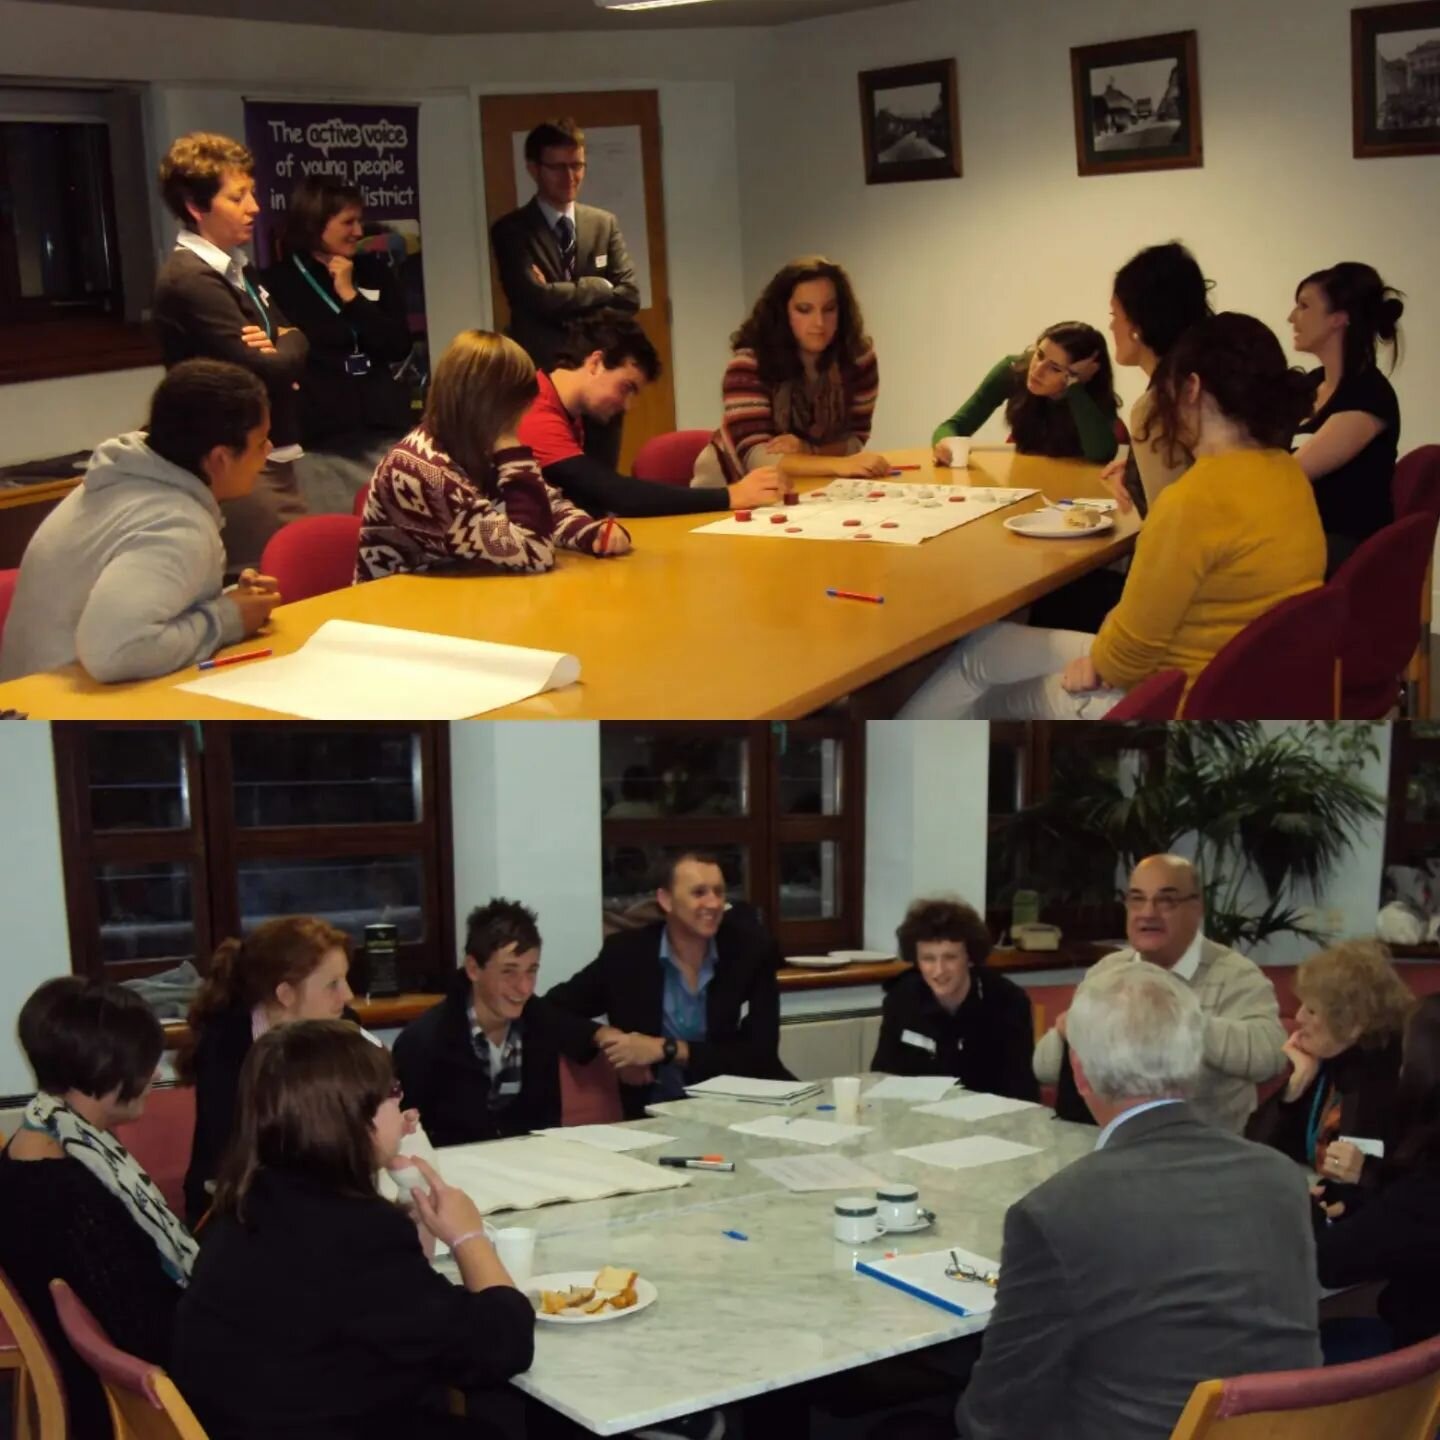 This weeks #throwbackthursday is back to the autumn of 2012. SDYC members attending an SDC corporate consultation event 📣🗣💼✍️

@steveyouthworker @sebyouthworker @strouddistrictcouncil 

#strouddistrictyouthcouncil #stroudyouthvoice #stroudyouth #y